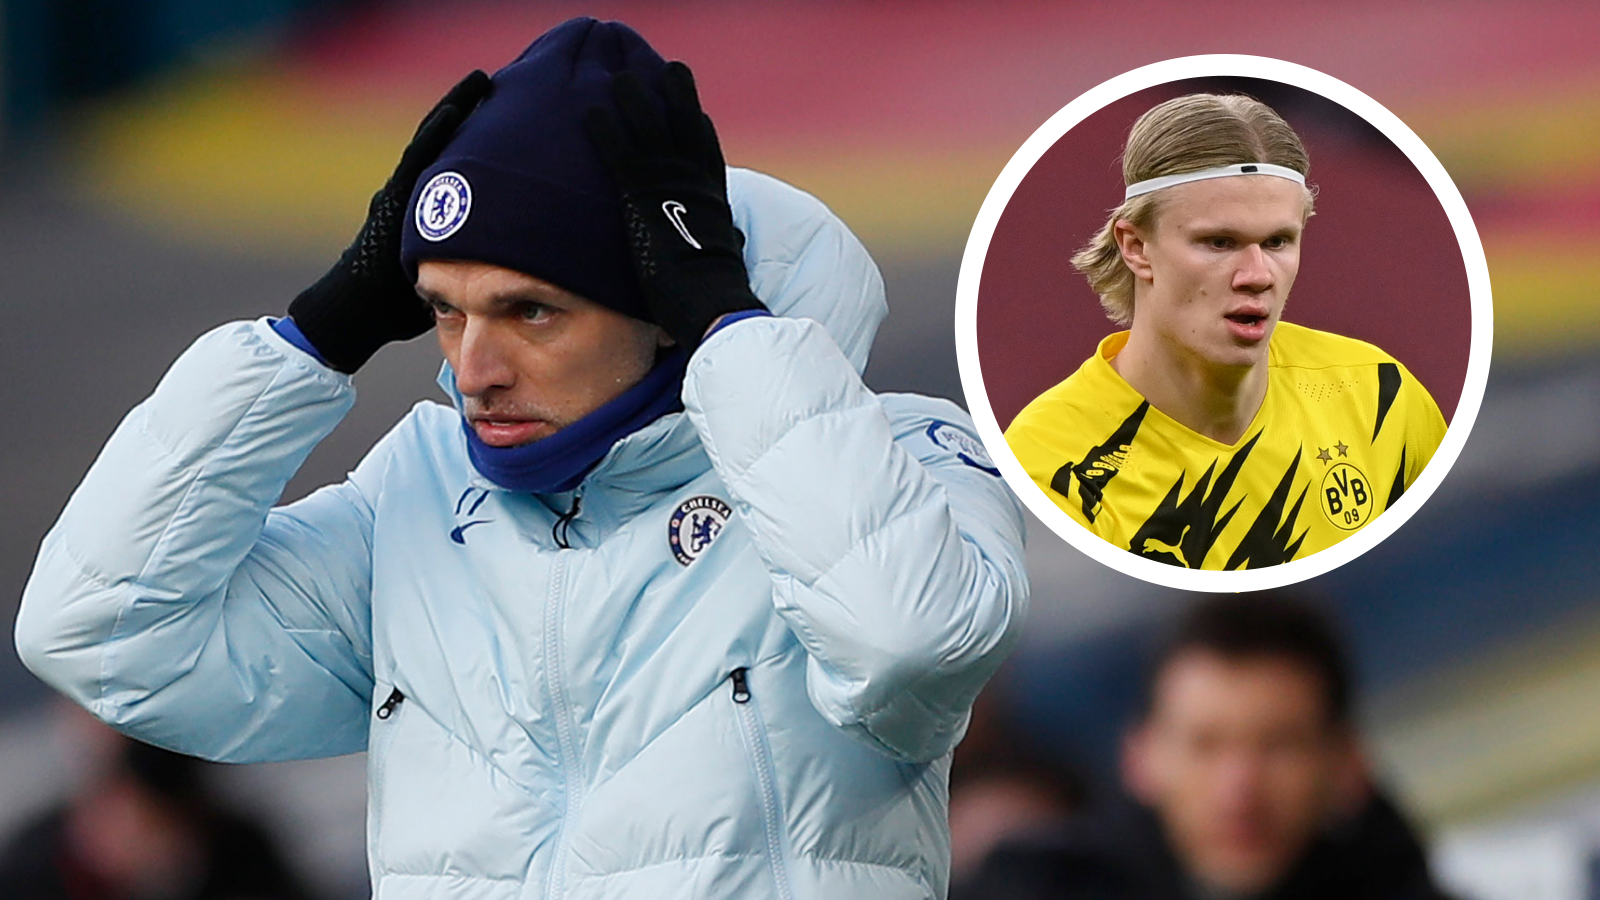 Chelsea boss Tuchel claims he 'fell into a trap' in discussing Haaland transfer